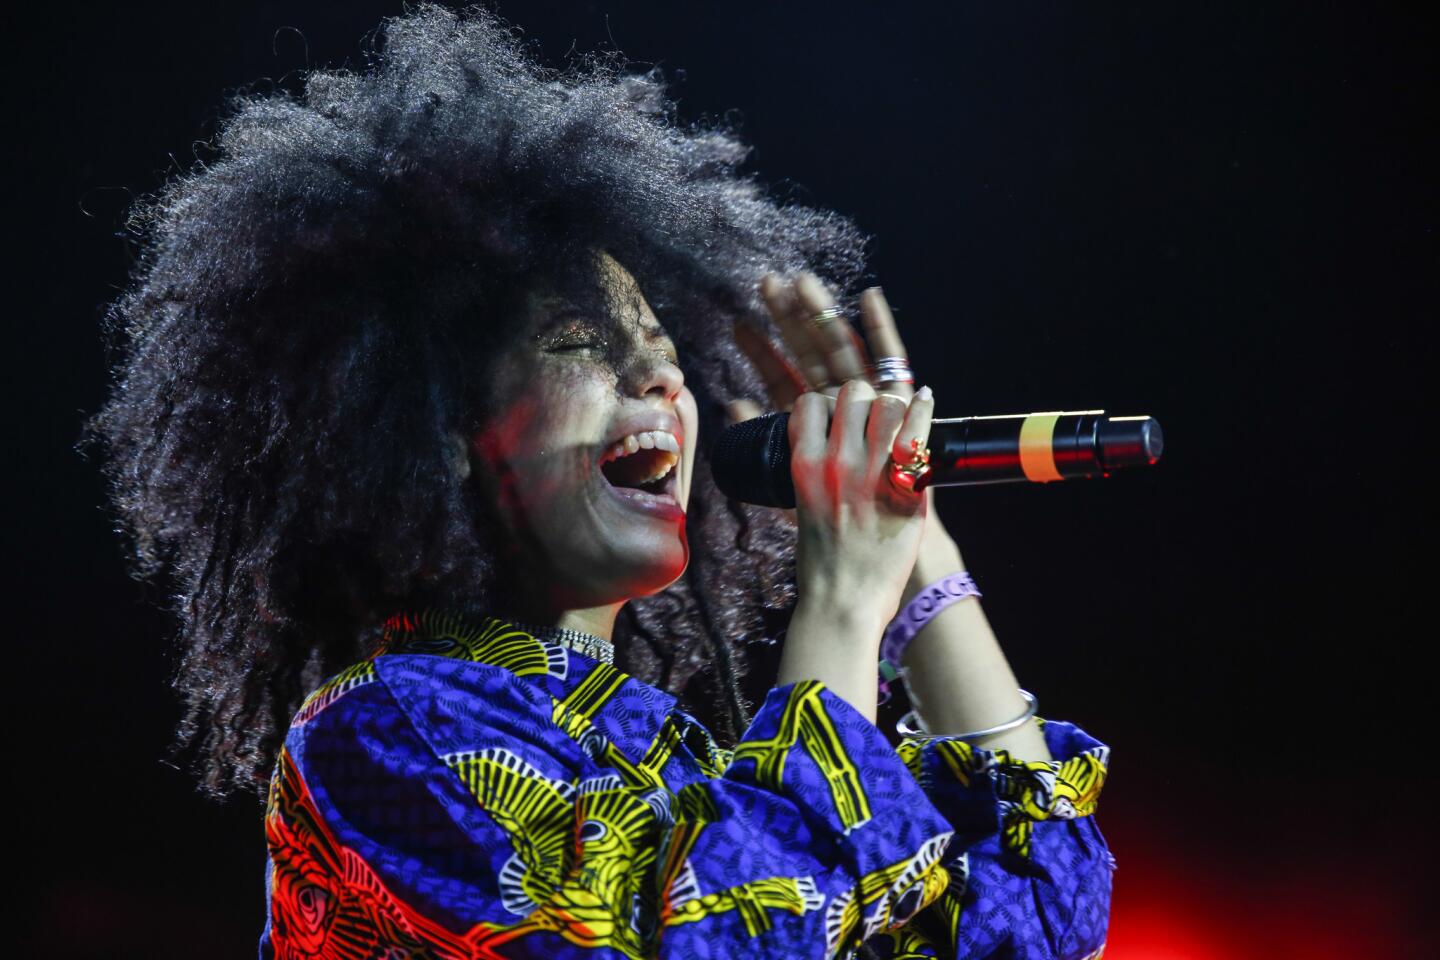 Ibeyi performs on the Gobi stage at the Coachella Valley Music and Arts Festival during Weekend 2, 2018.